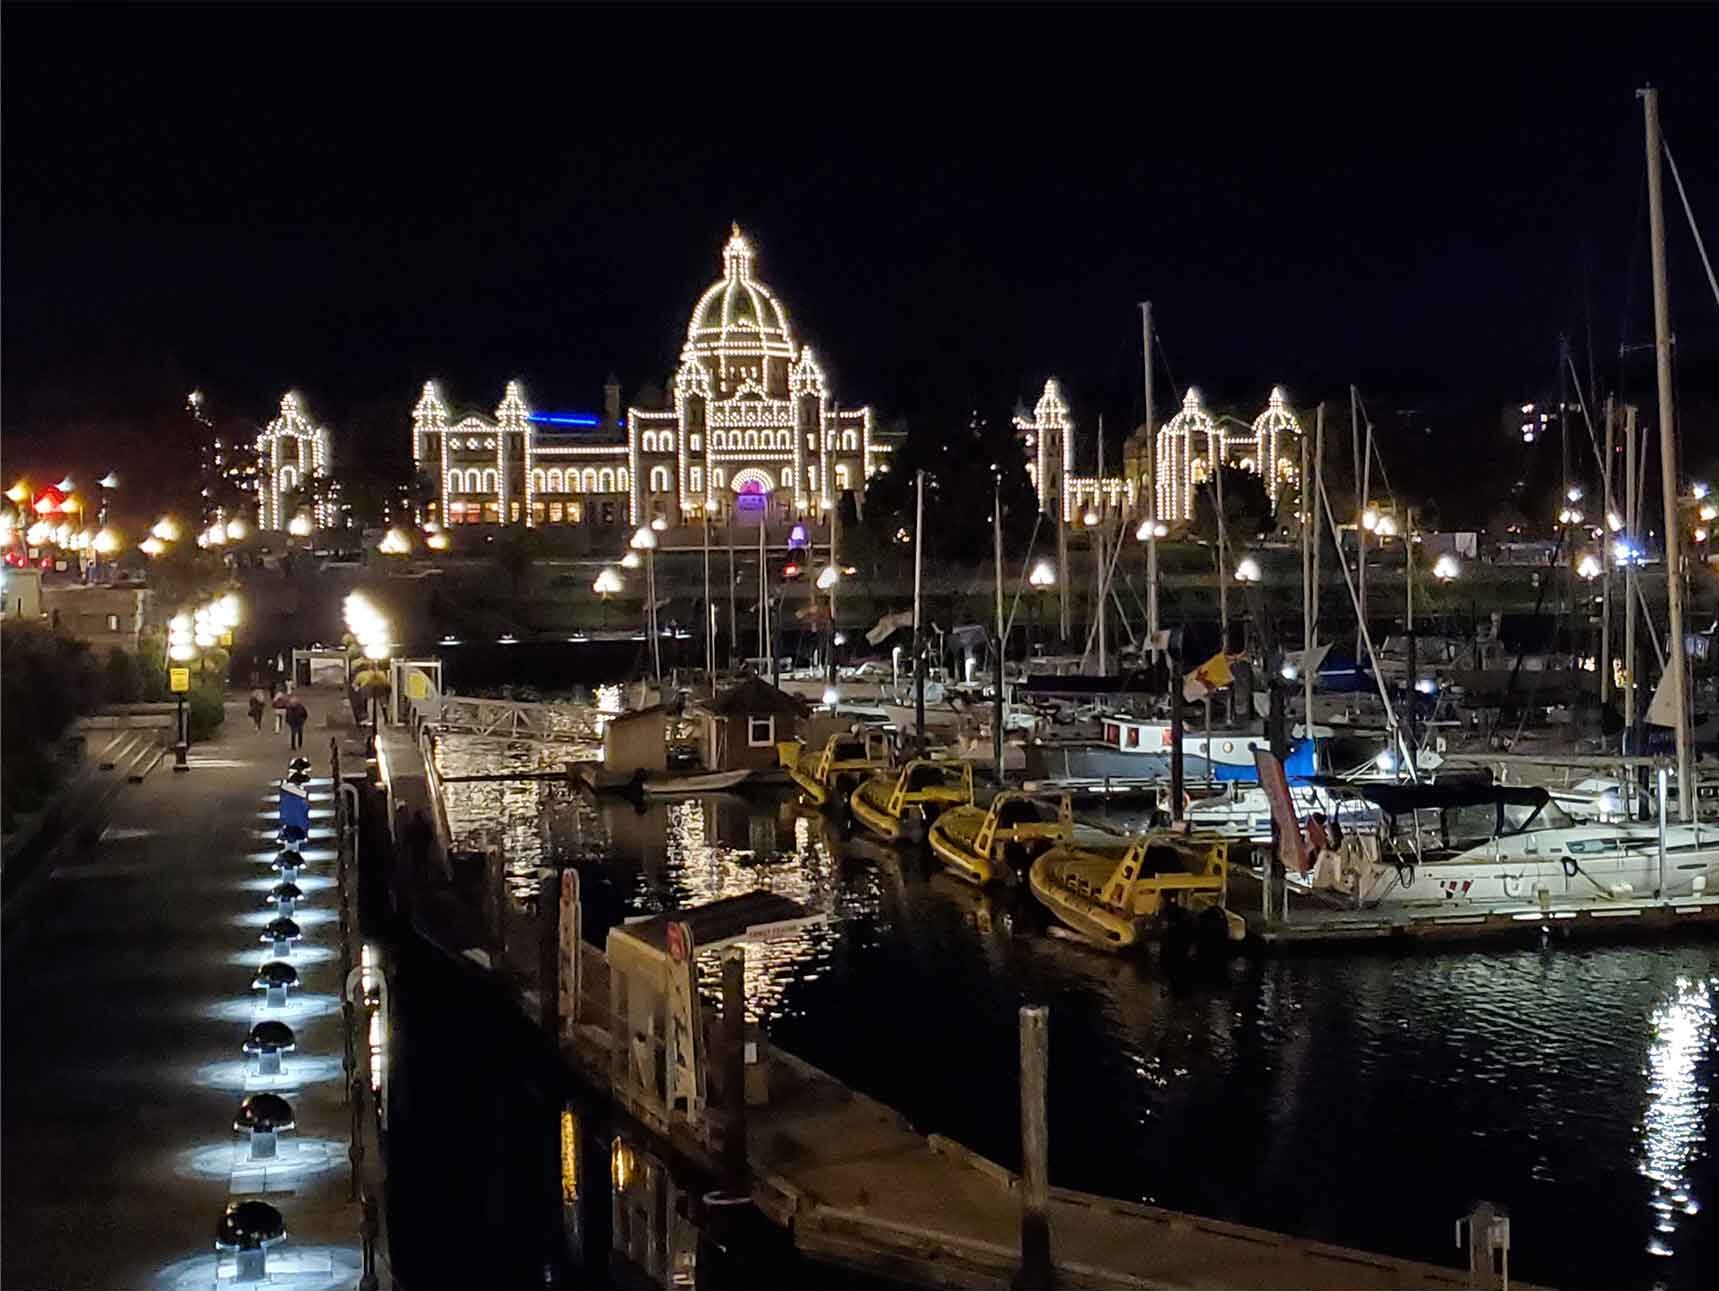 Lights of the capitol building in Victoria on the harbour